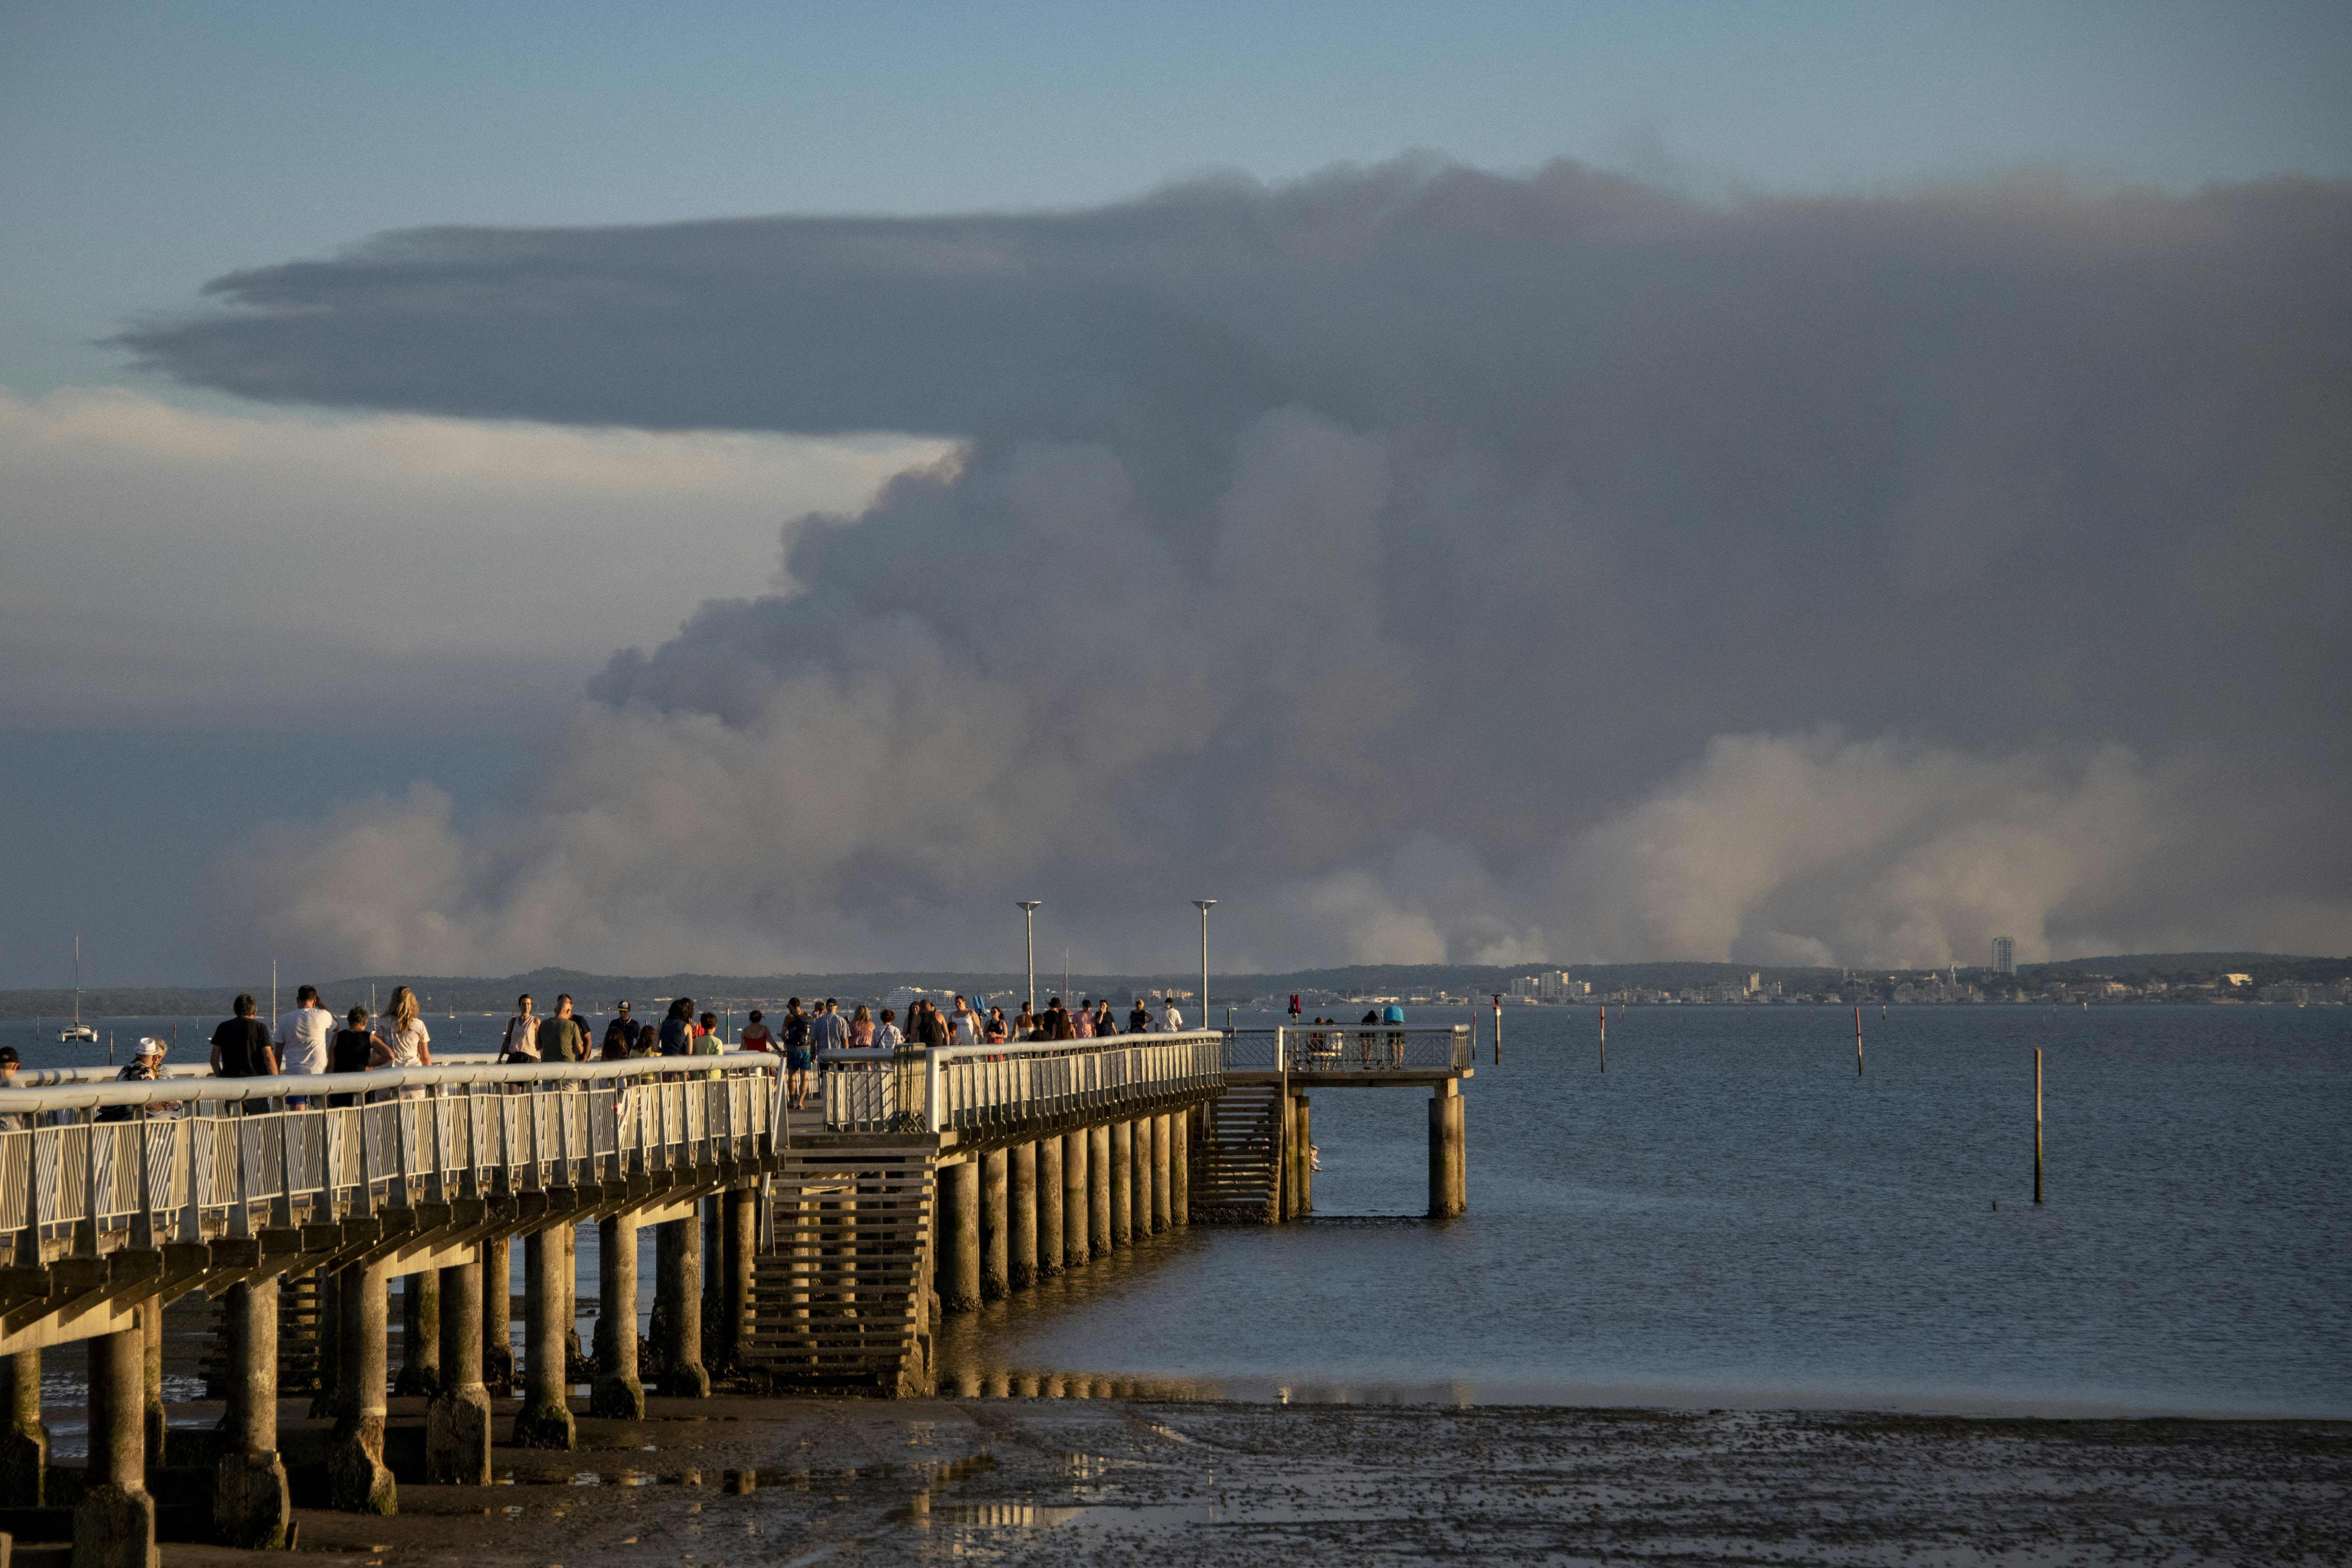 Tourists look at the plume of dark smoke on the shoreline of Arcachon from the peer in Andernos-les-Bains, due to a wildfire in a forest near La Teste, southwestern France, on July 14.